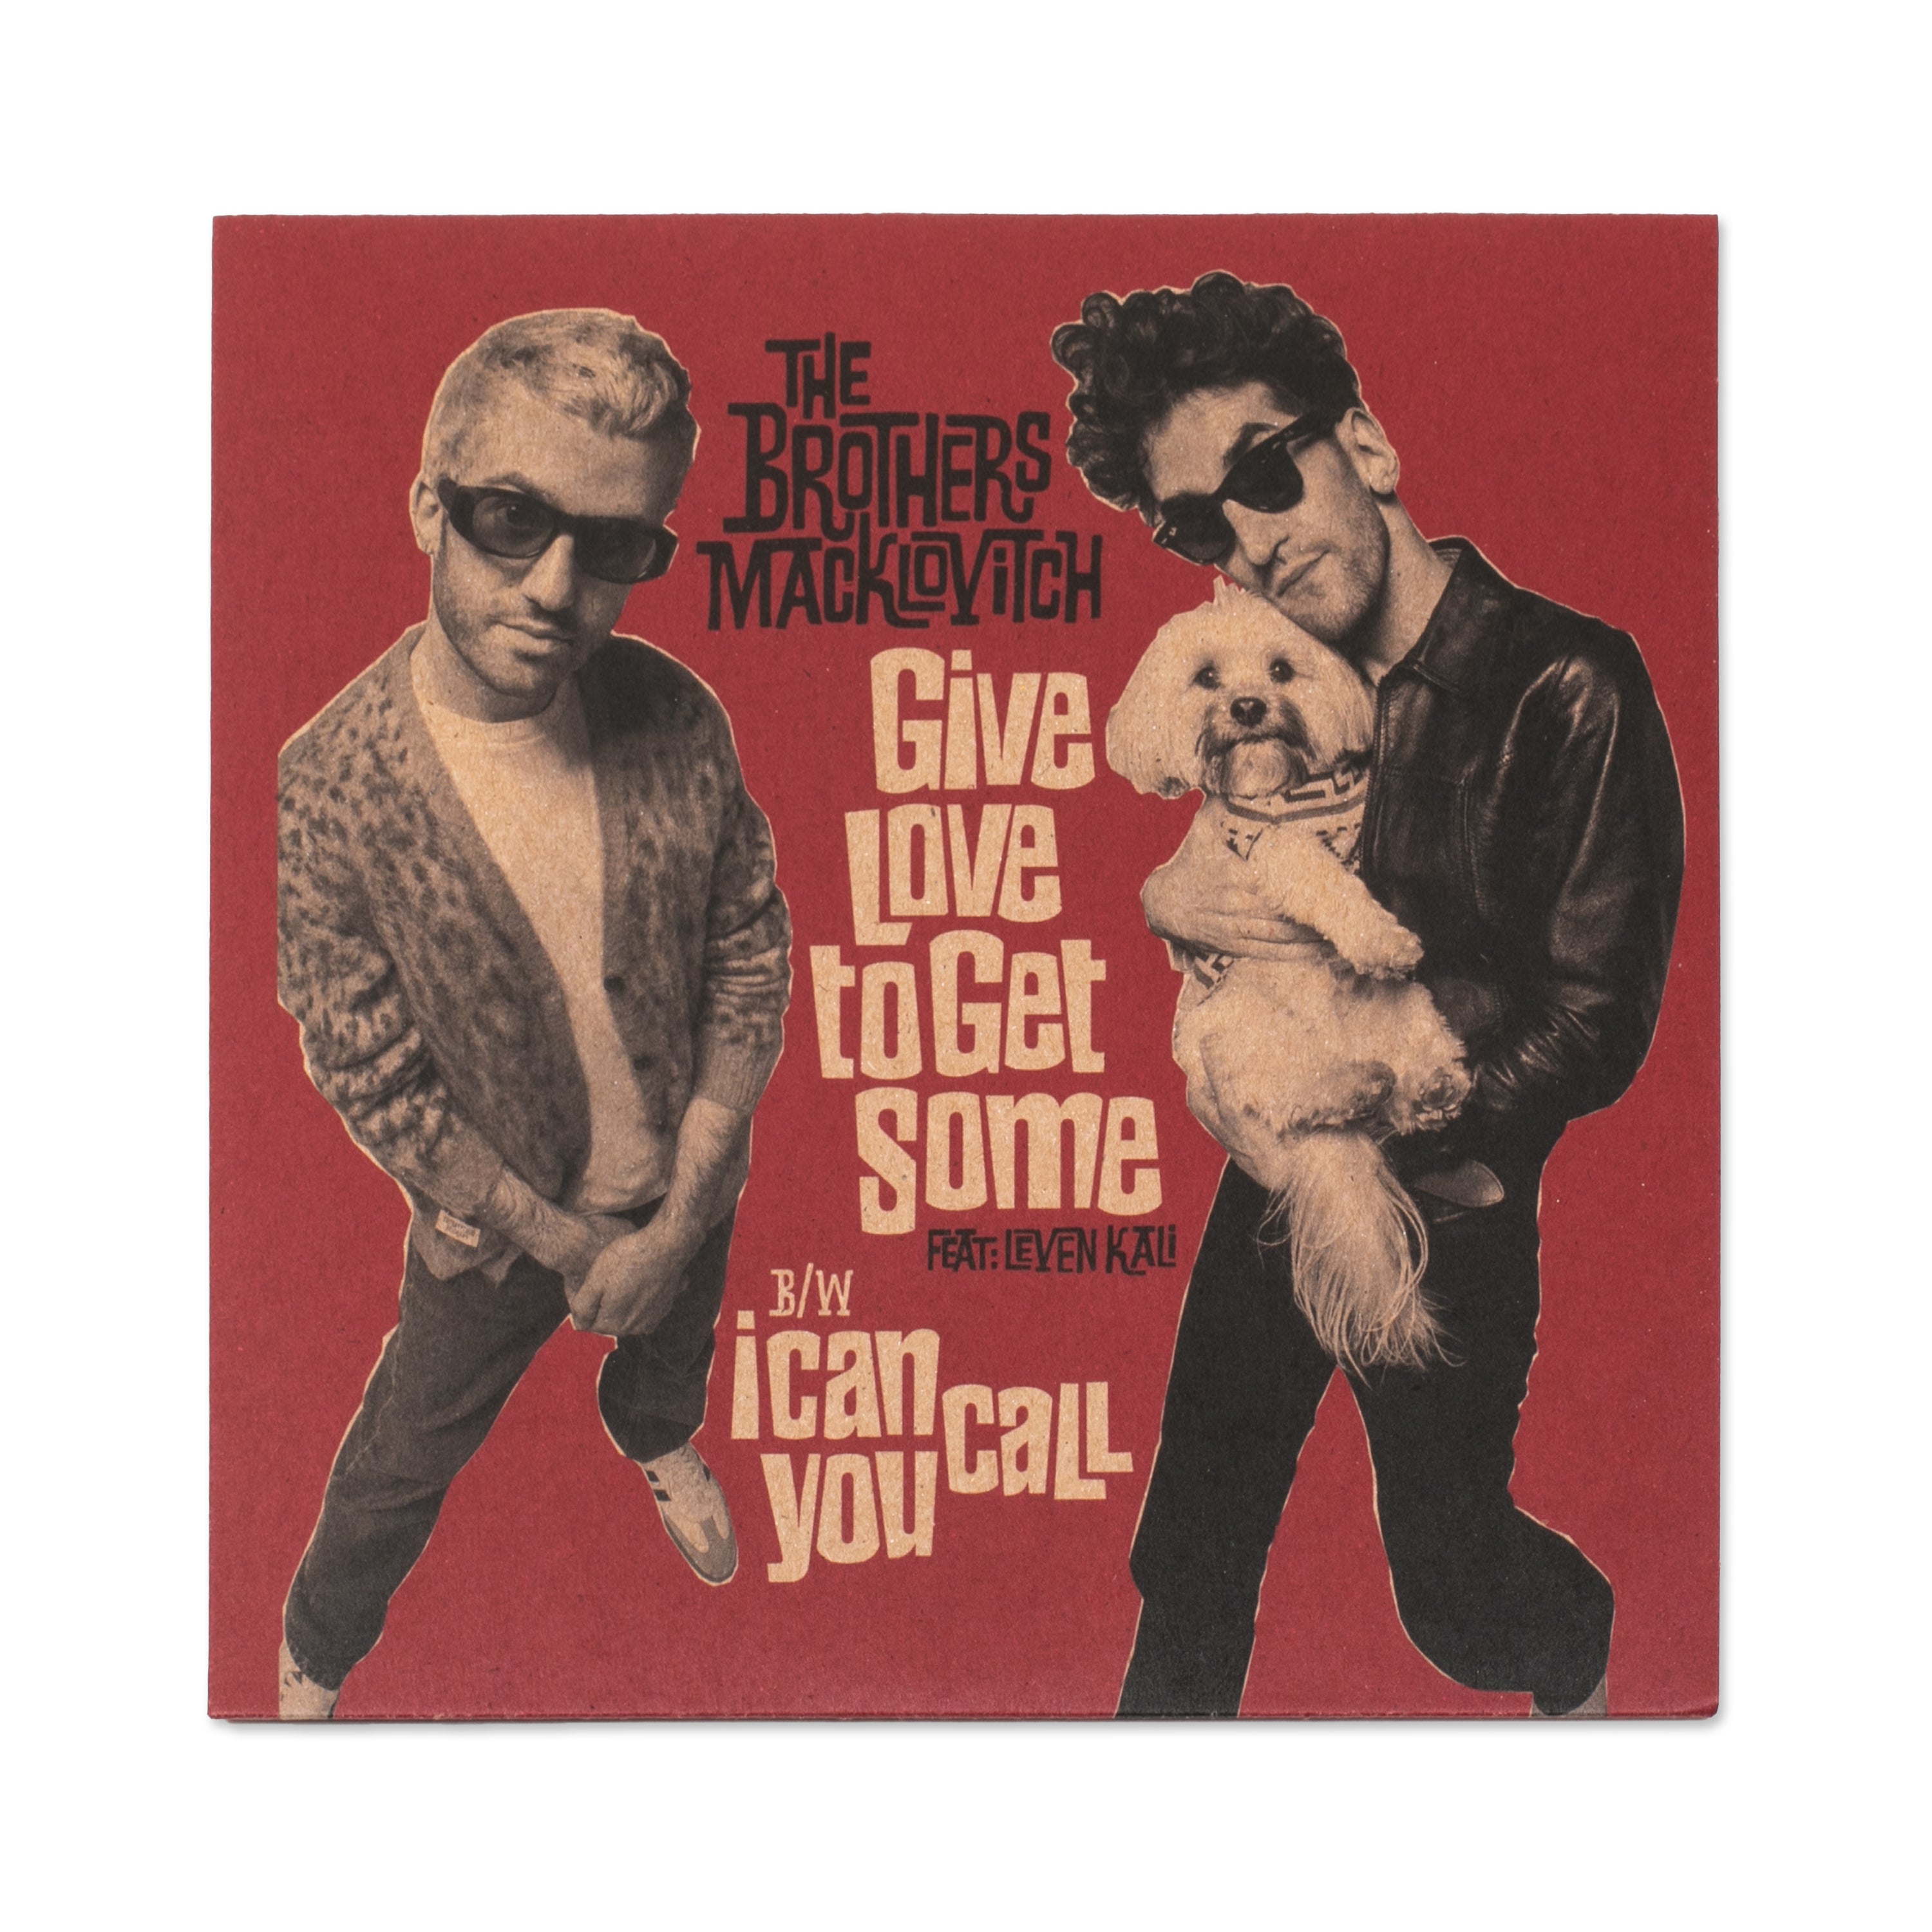 The Brothers Macklovitch “Give Love To Get Some / I Can Call You” Color Vinyl 7”